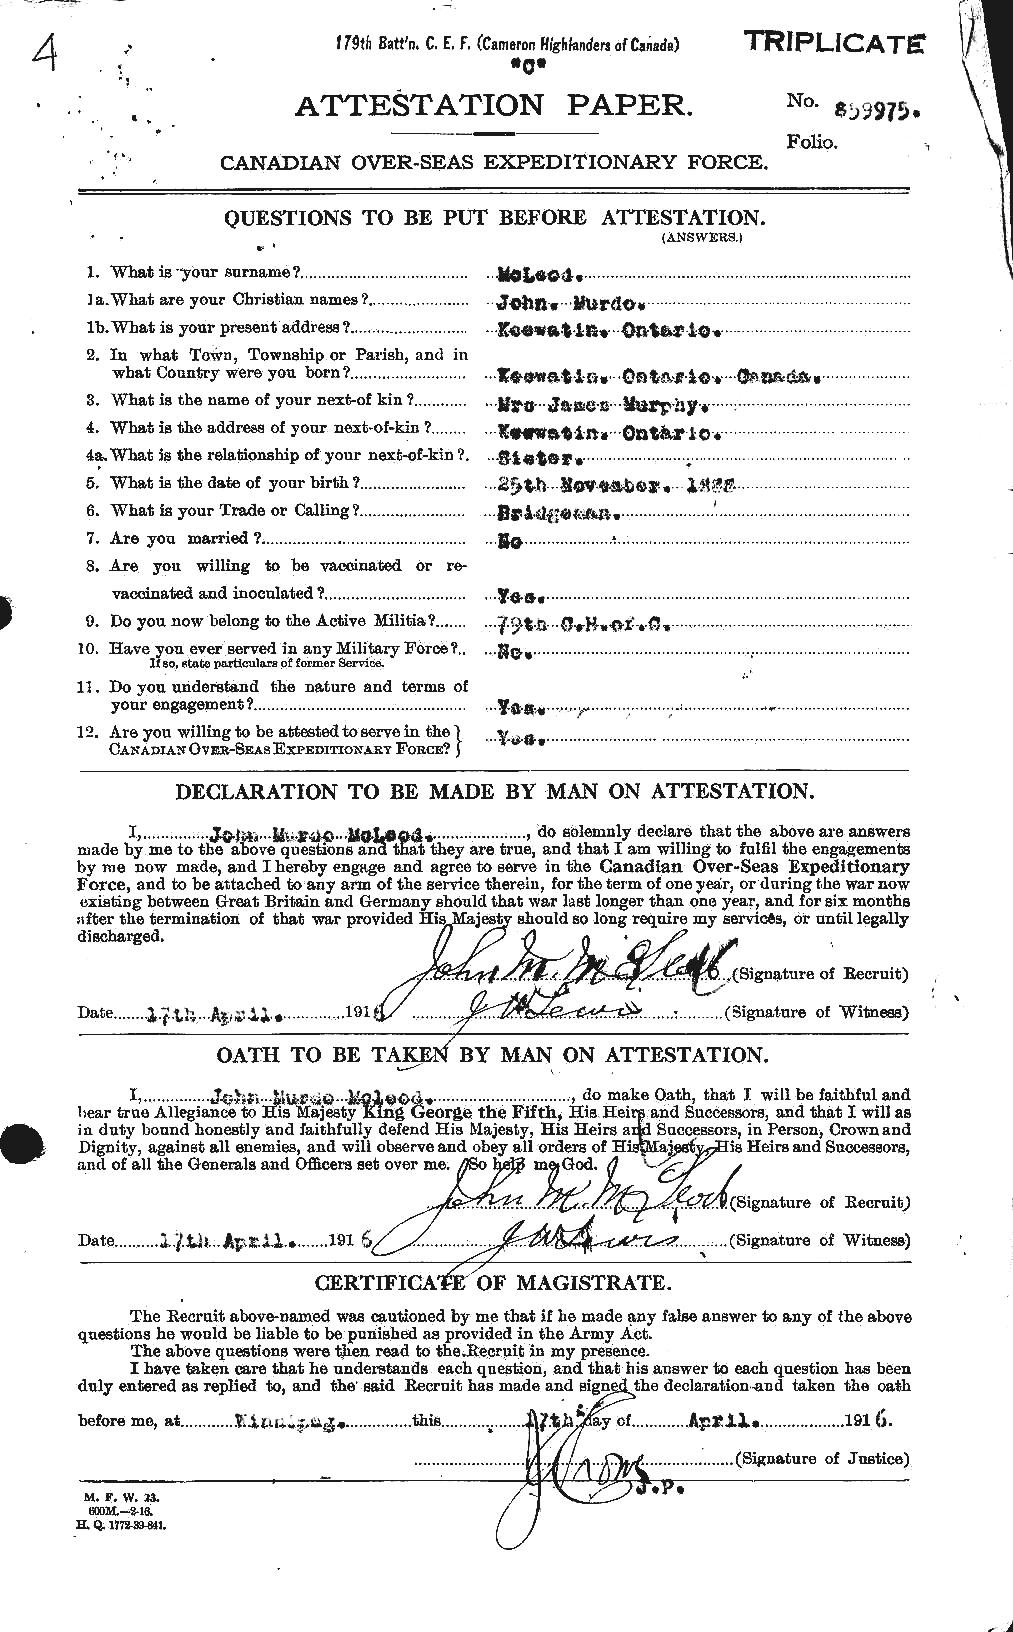 Personnel Records of the First World War - CEF 535034a